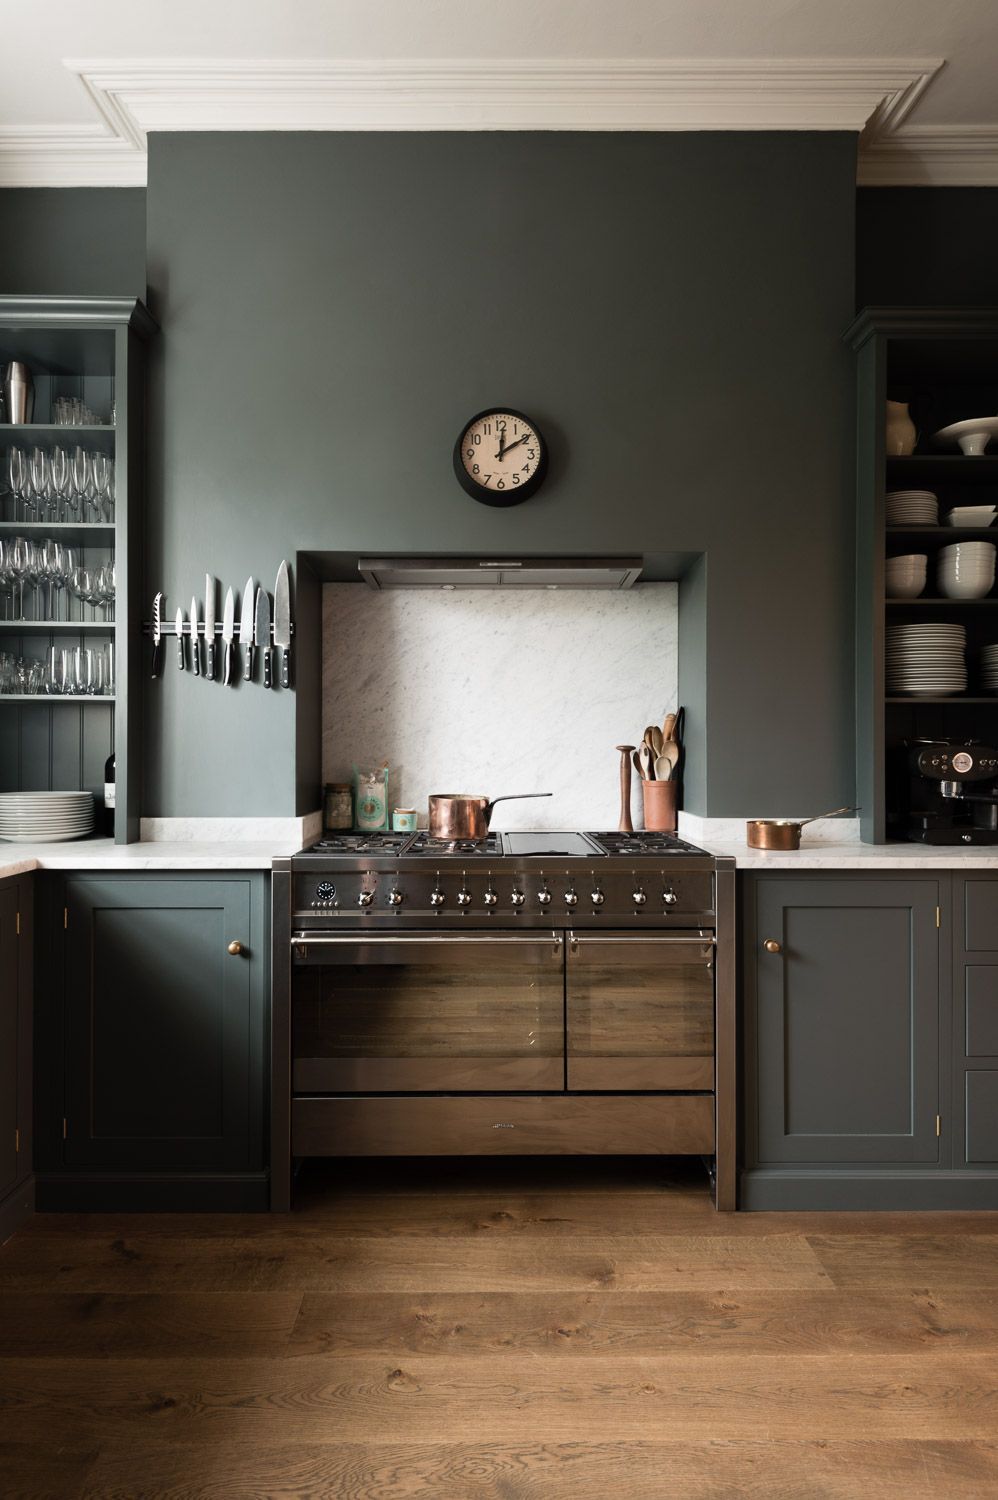 The cupboards, the colours, the honed marble worktop and the understated open cupboards either side of